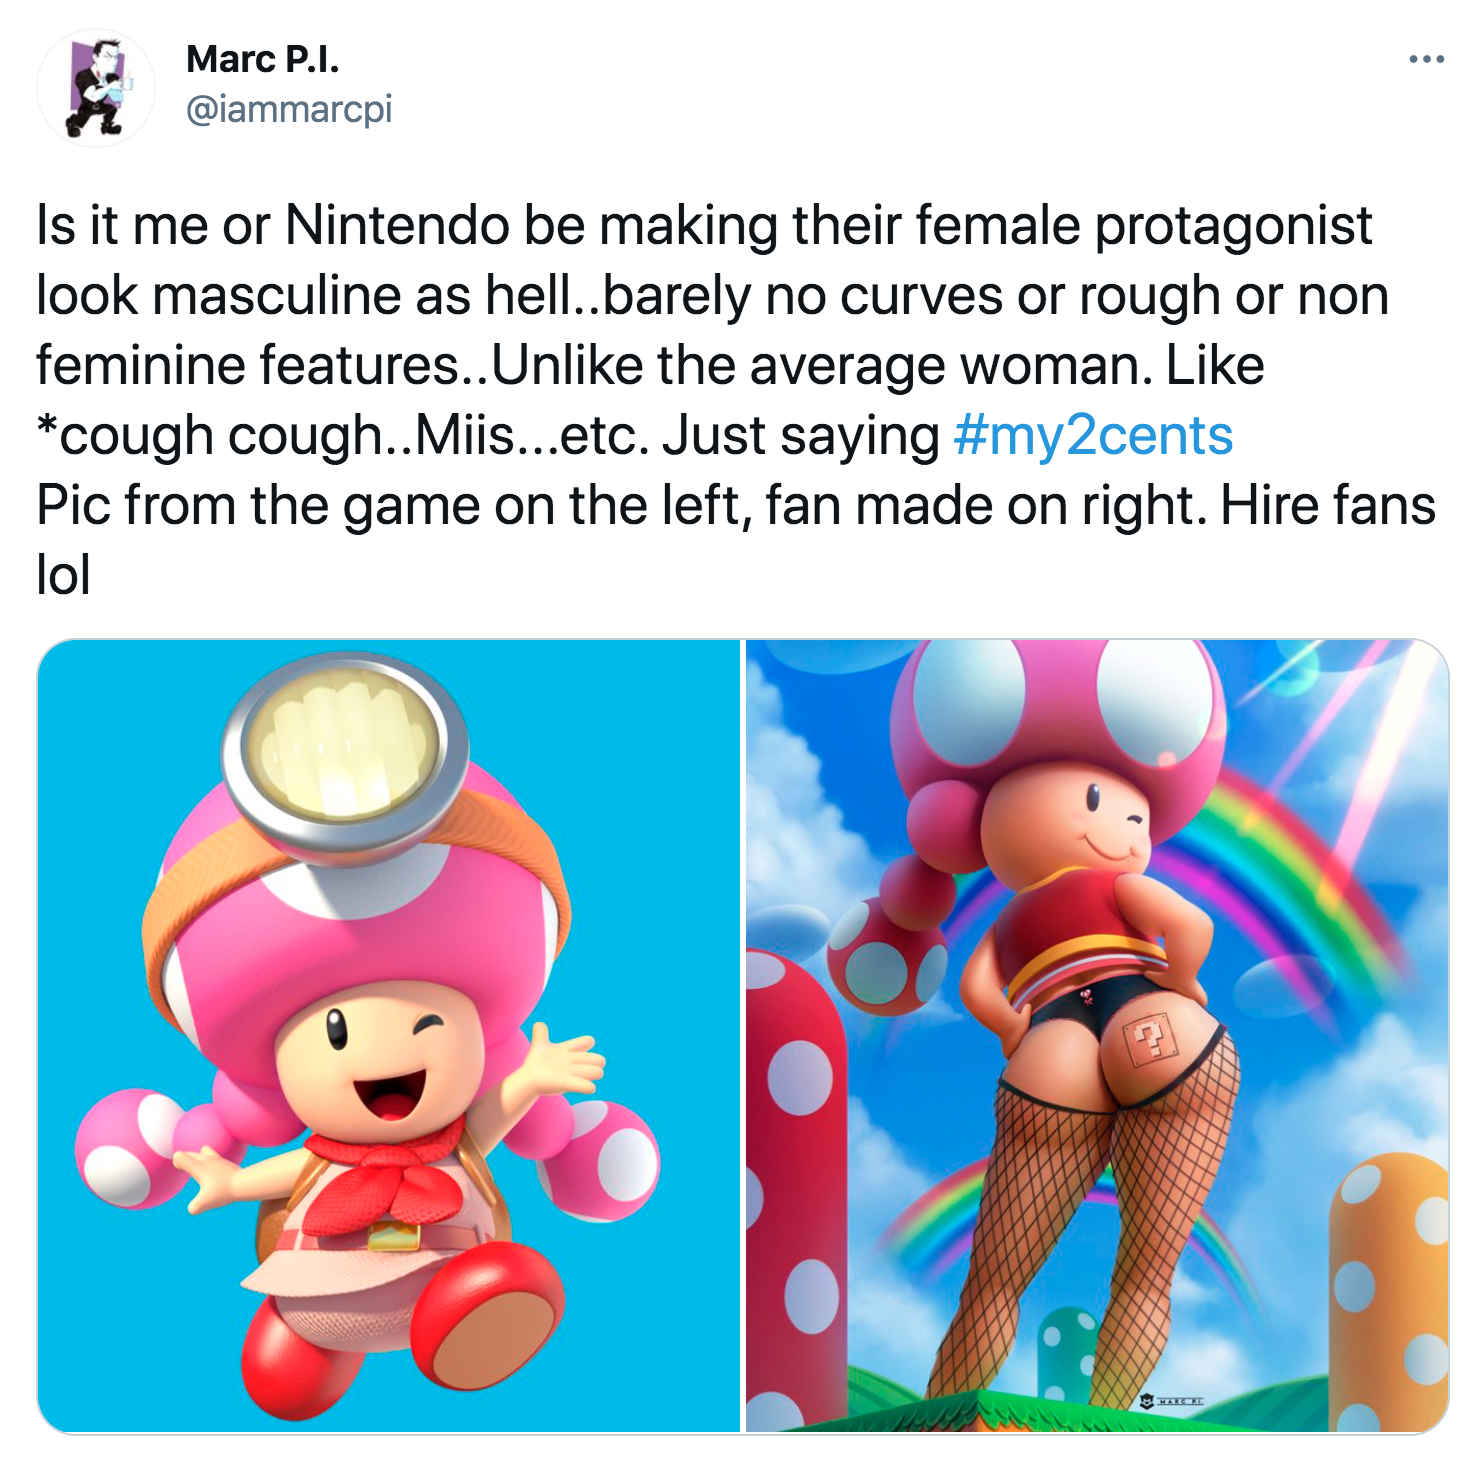 funny gaming memes - cartoon - Marc P.I. Is it me or Nintendo be making their female protagonist look masculine as hell..barely no curves or rough or non feminine features..Un the average woman. cough cough.. Miis...etc. Just saying Pic from the game on t